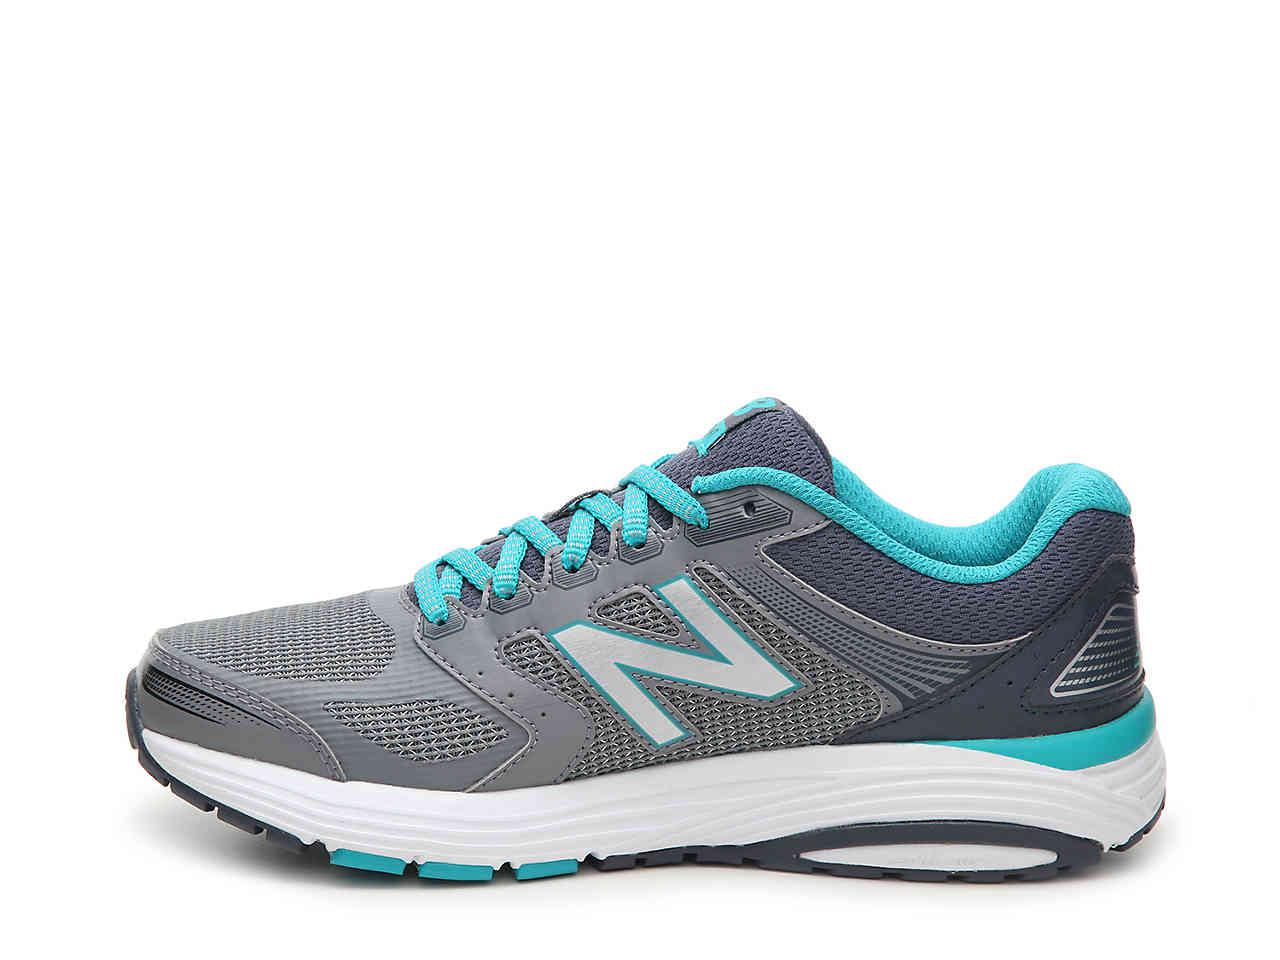 New Balance 560 V7 Running Shoe in Grey/Teal (Gray) - Lyst